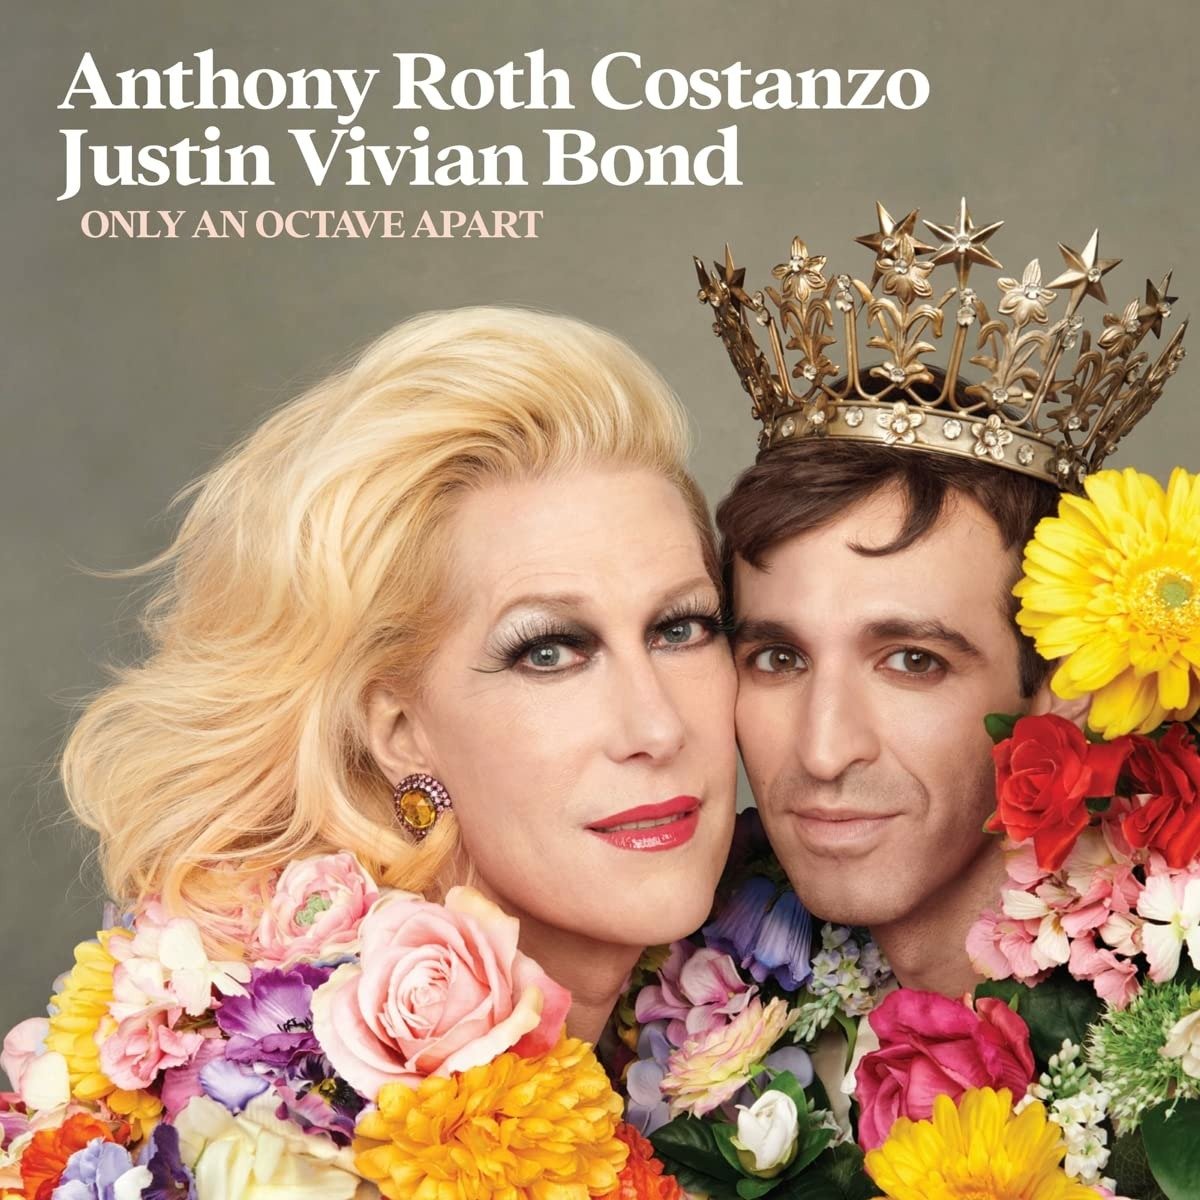 CD Shop - COSTANZO, ANTHONY ROTH ONLY AN OCTAVE APART